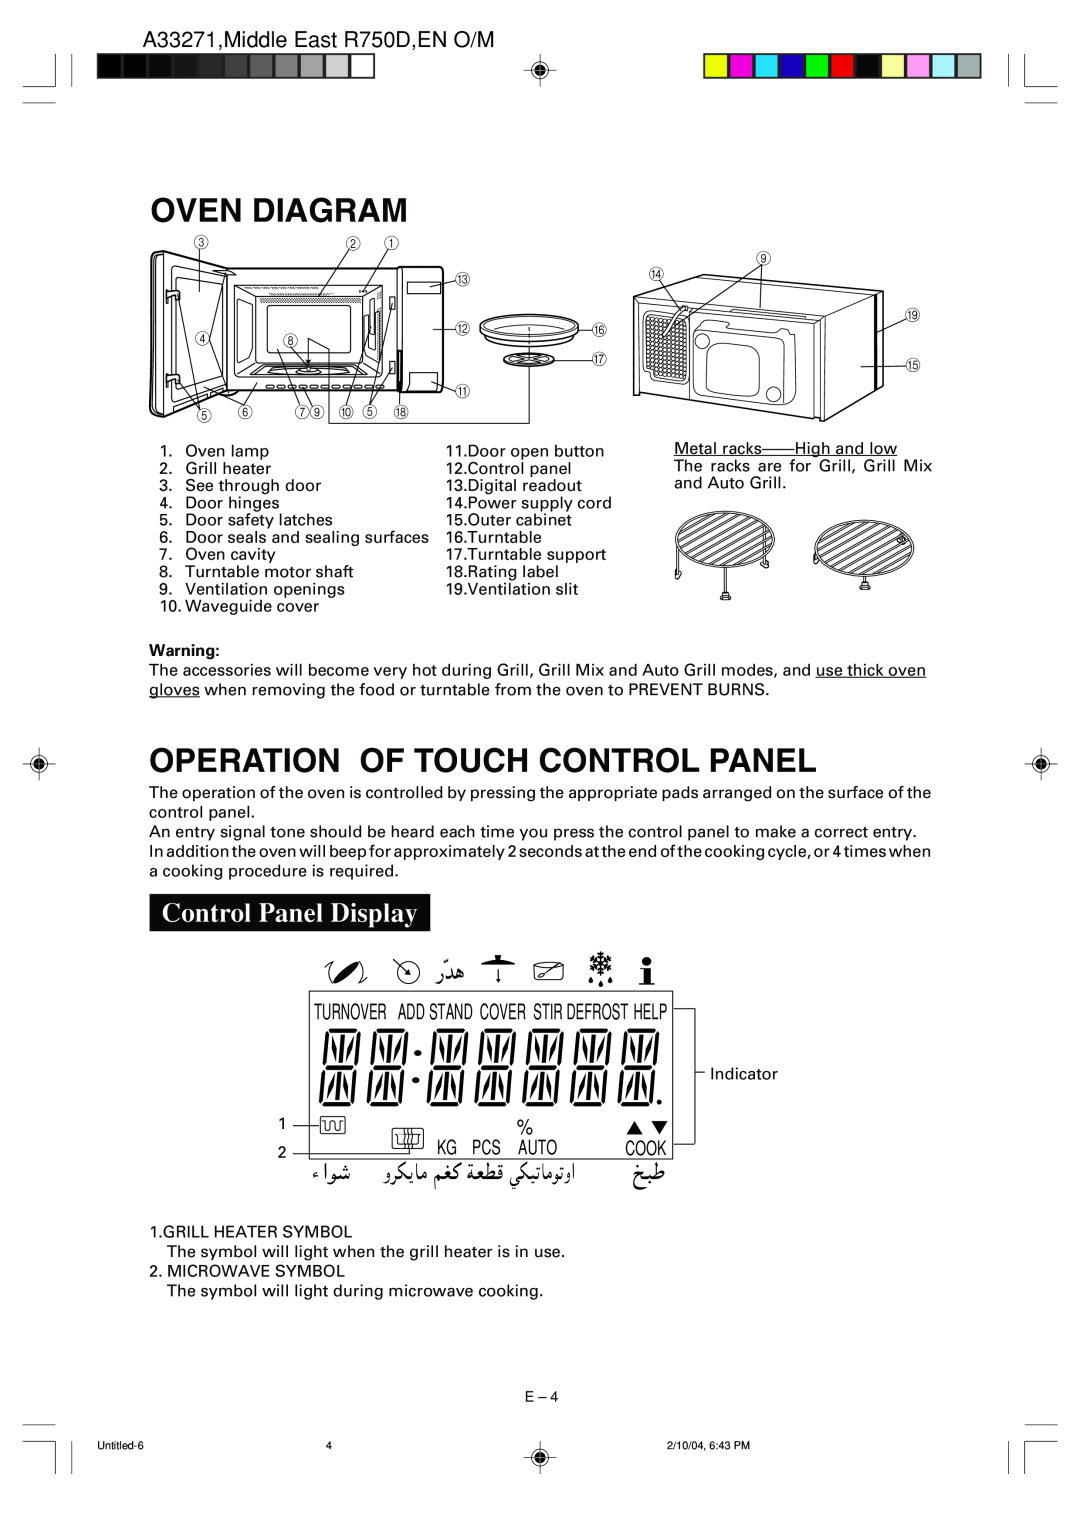 Sharp R-750D Oven Diagram, Operation Of Touch Control Panel, Control Panel Display, ≥bÒ¸, A33271,Middle East R750D,EN O/M 